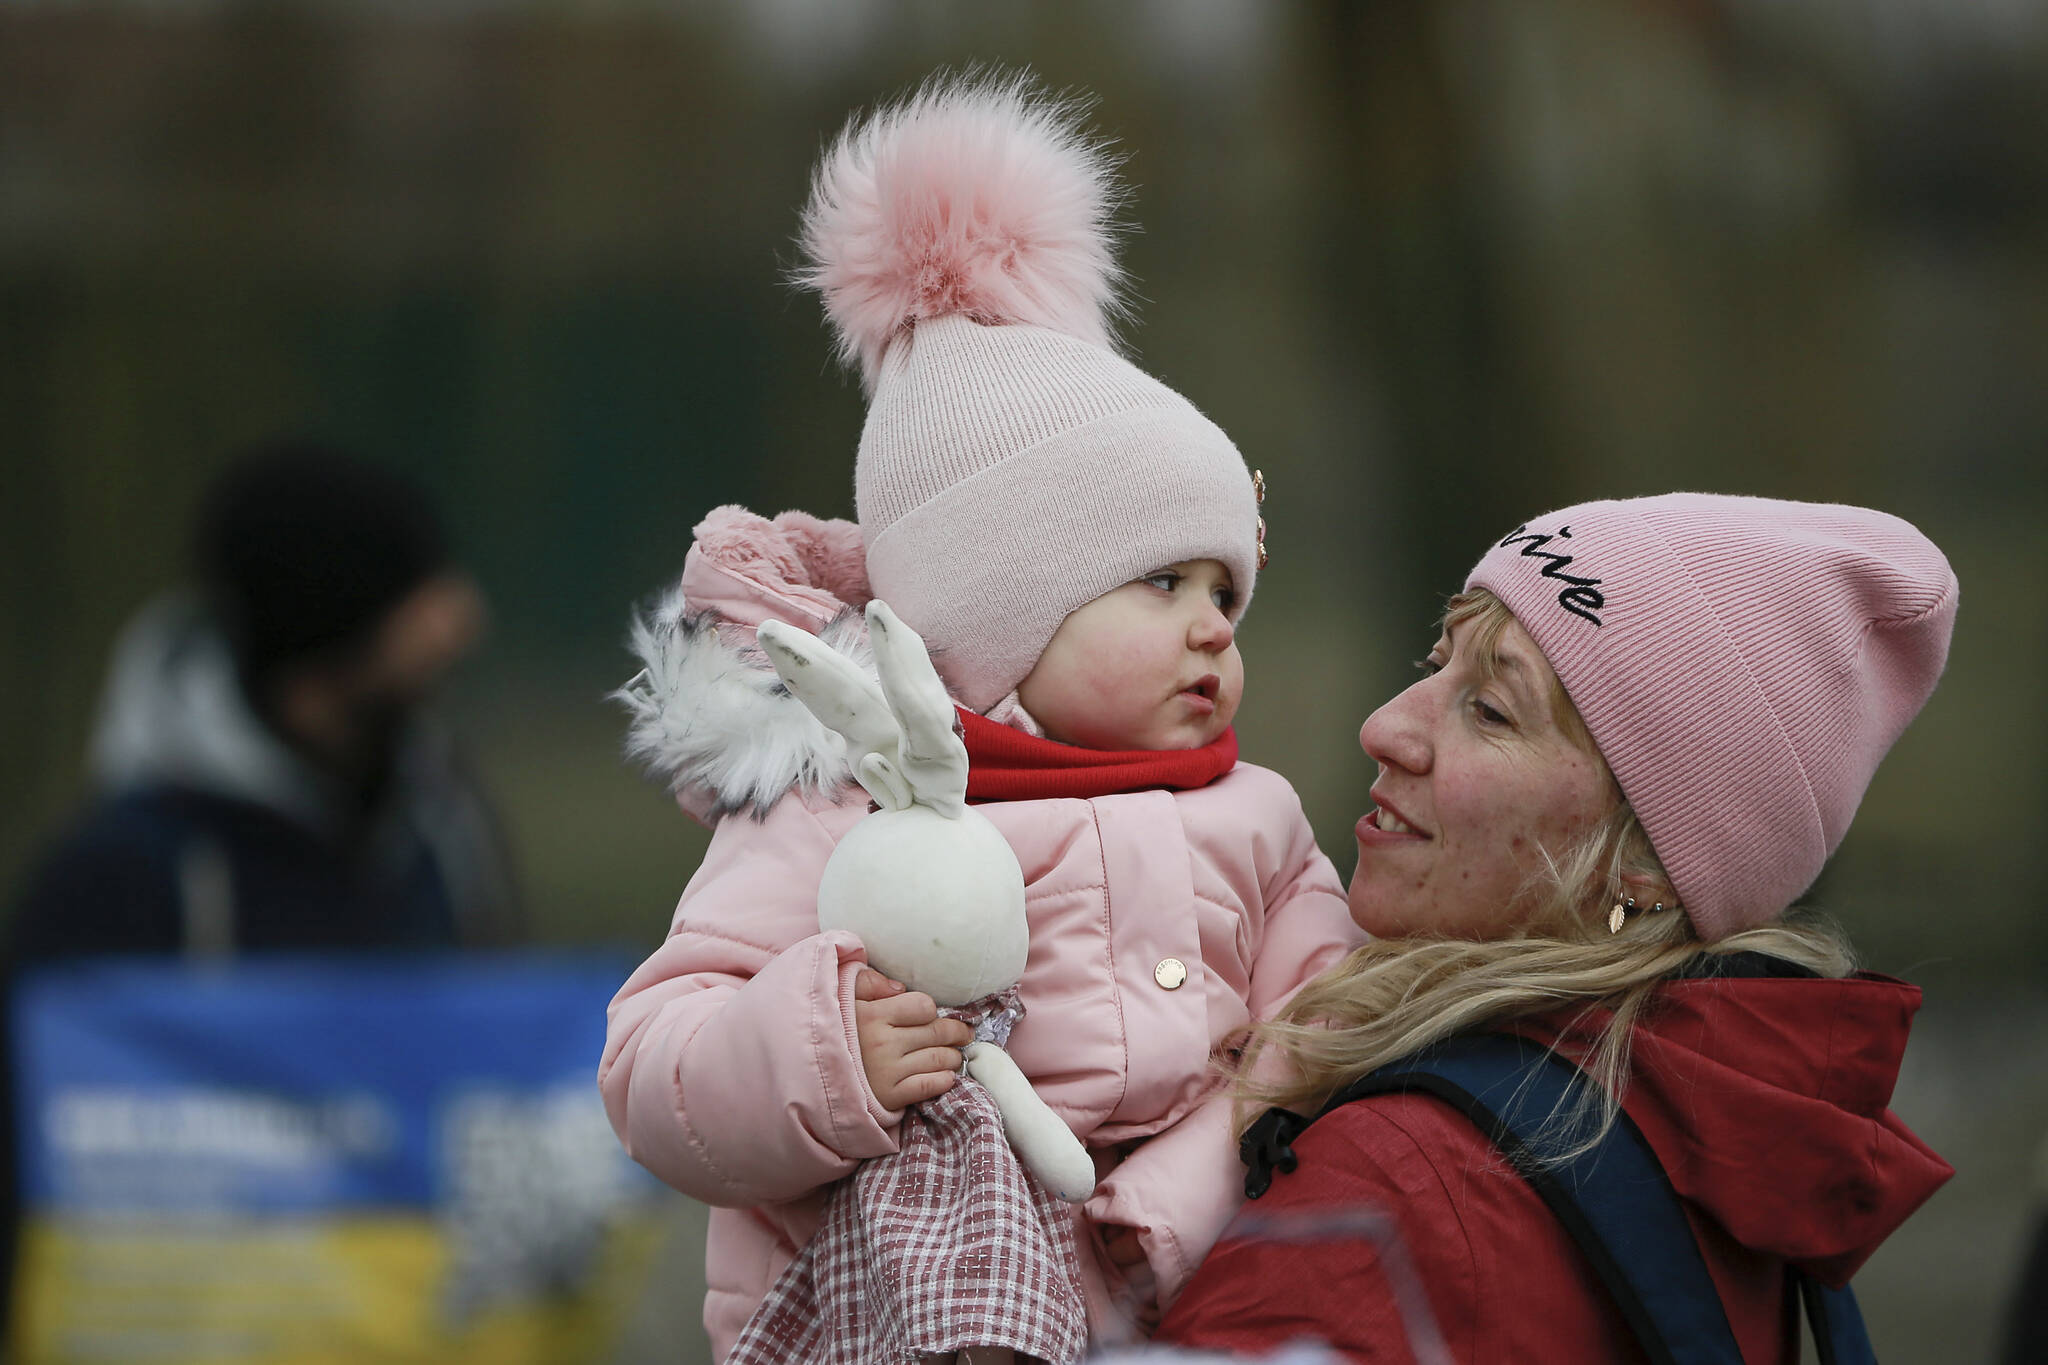 A woman holds a girl at a border crossing in Medyka, Poland, Thursday, March 3, 2022, as they flee the Russian invasion. The U.N. refugee agency said Thursday at least 1 million people have fled Ukraine since Russia’s invasion a week ago, an exodus without precedent in this century for its speed. (AP Photo/Visar Kryeziu)